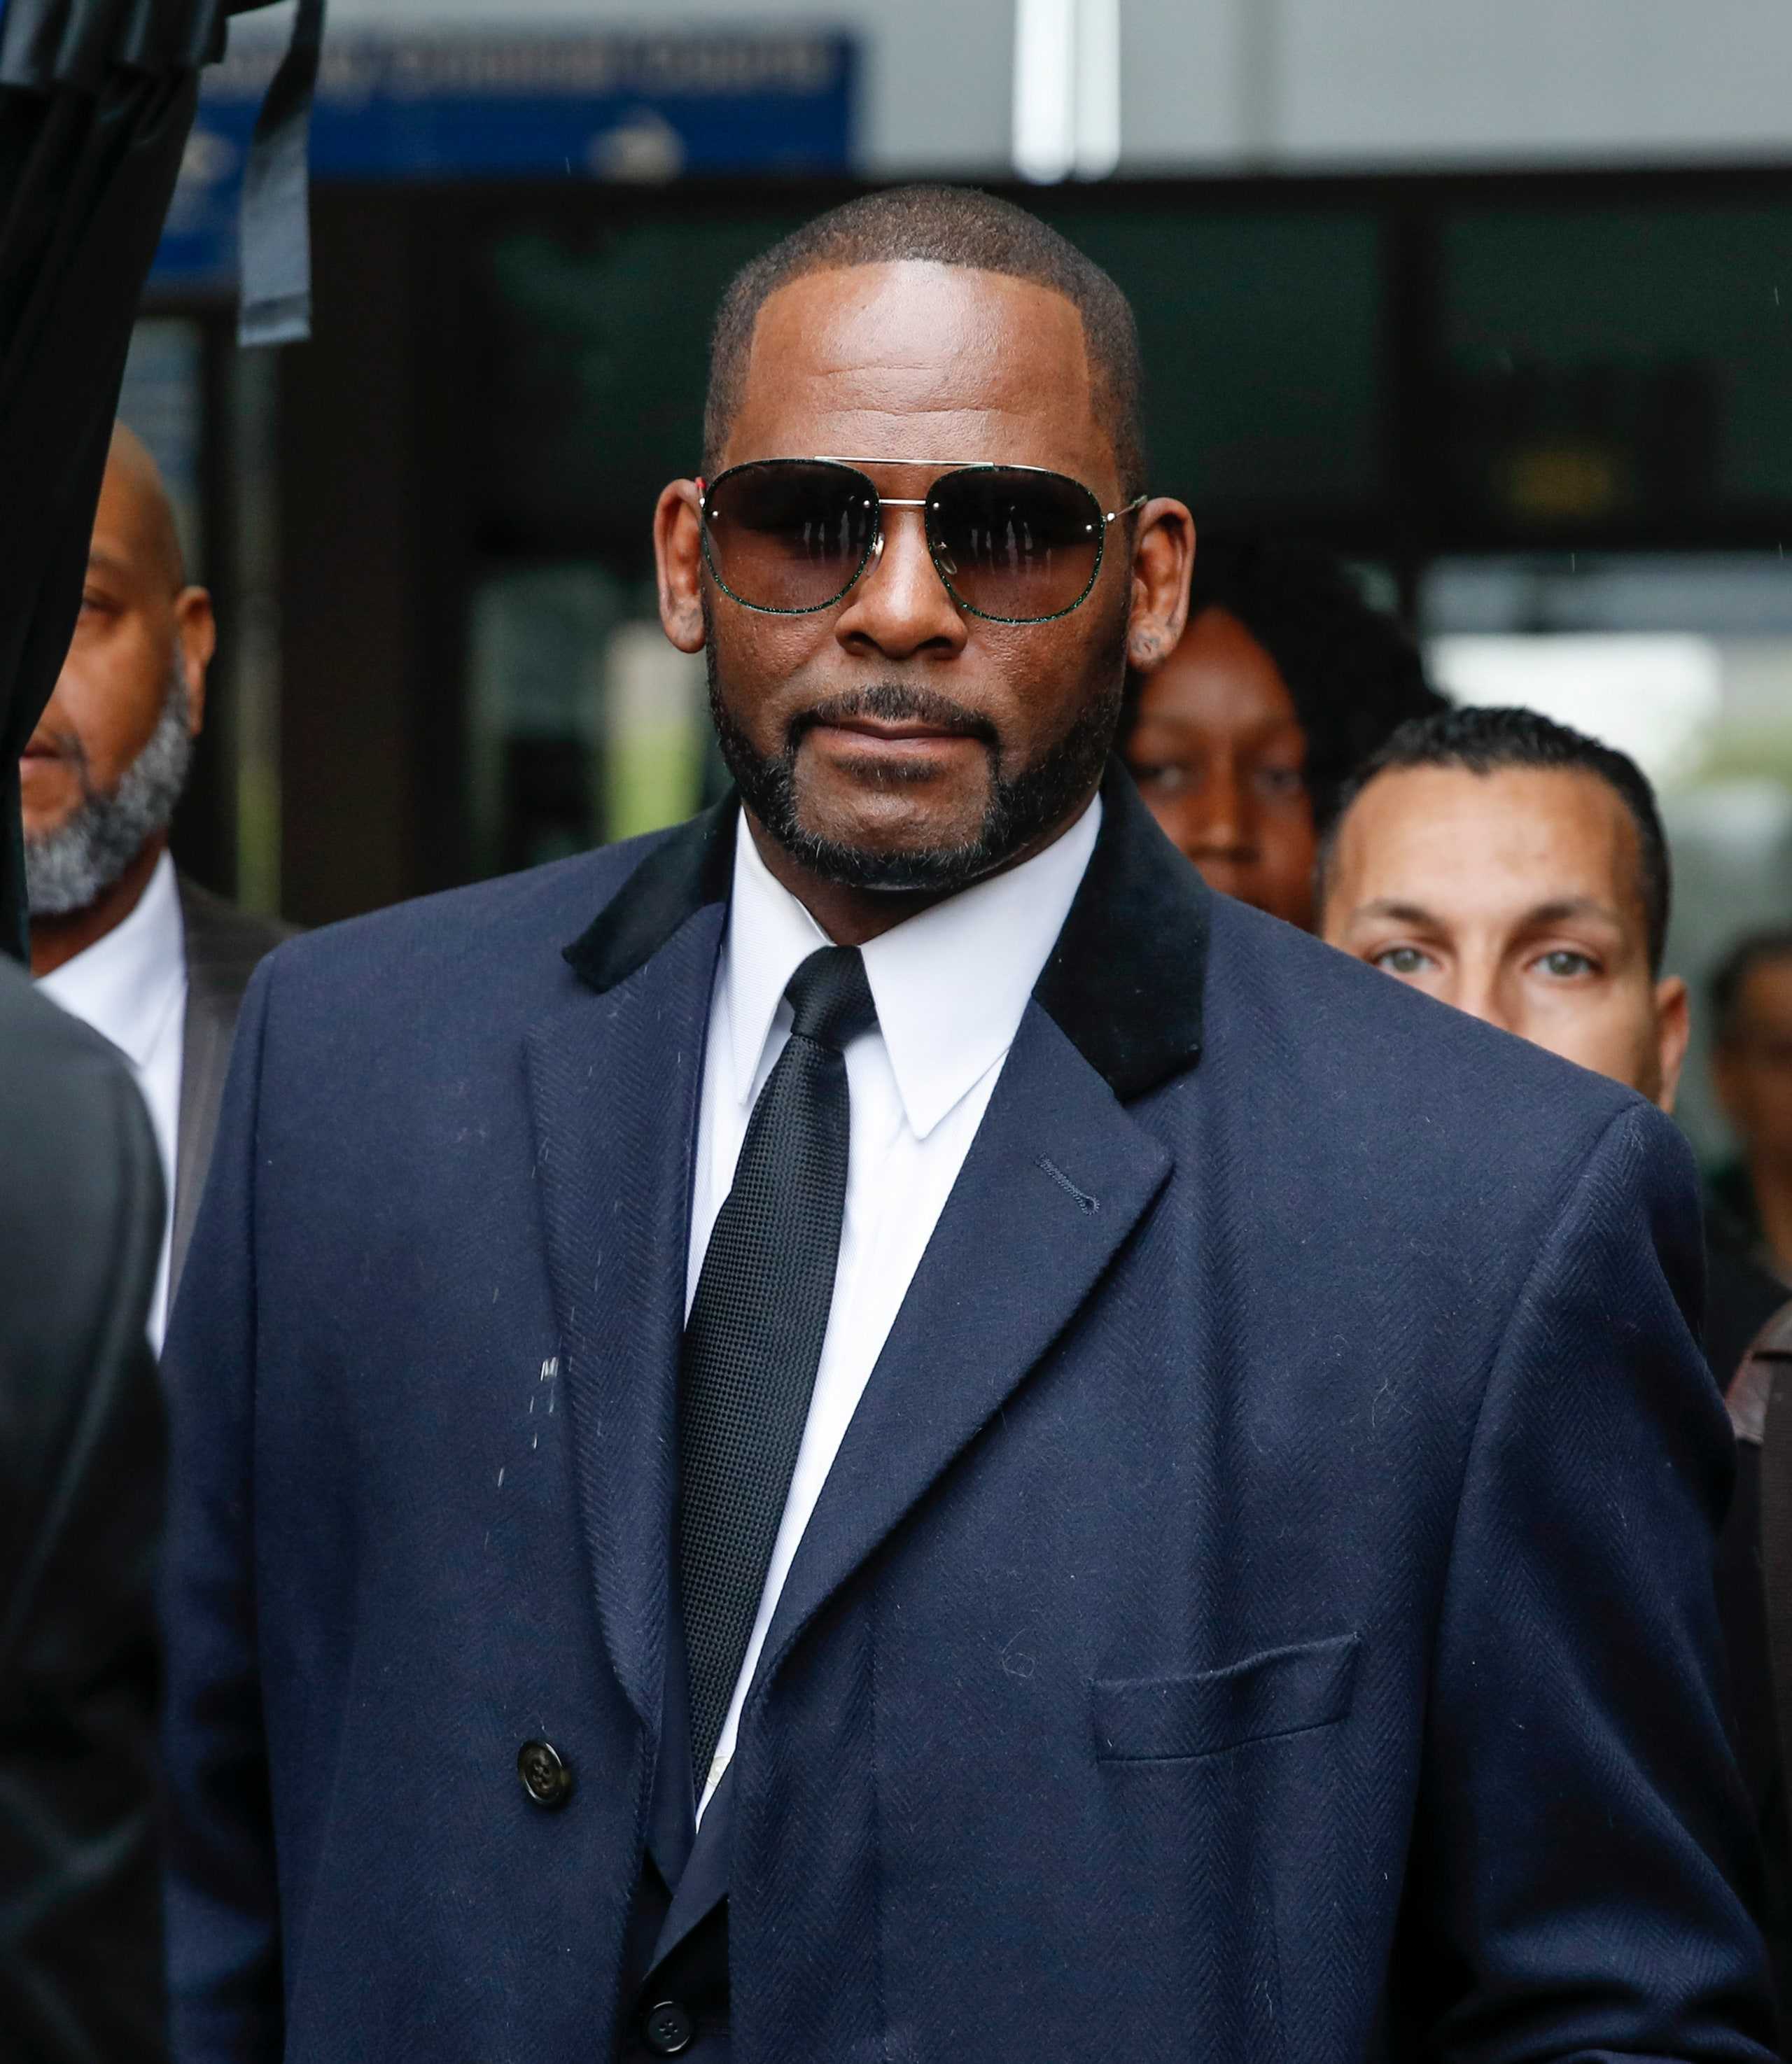 How R. Kelly's Trial Has Offered a View of His Escalating Impunity 